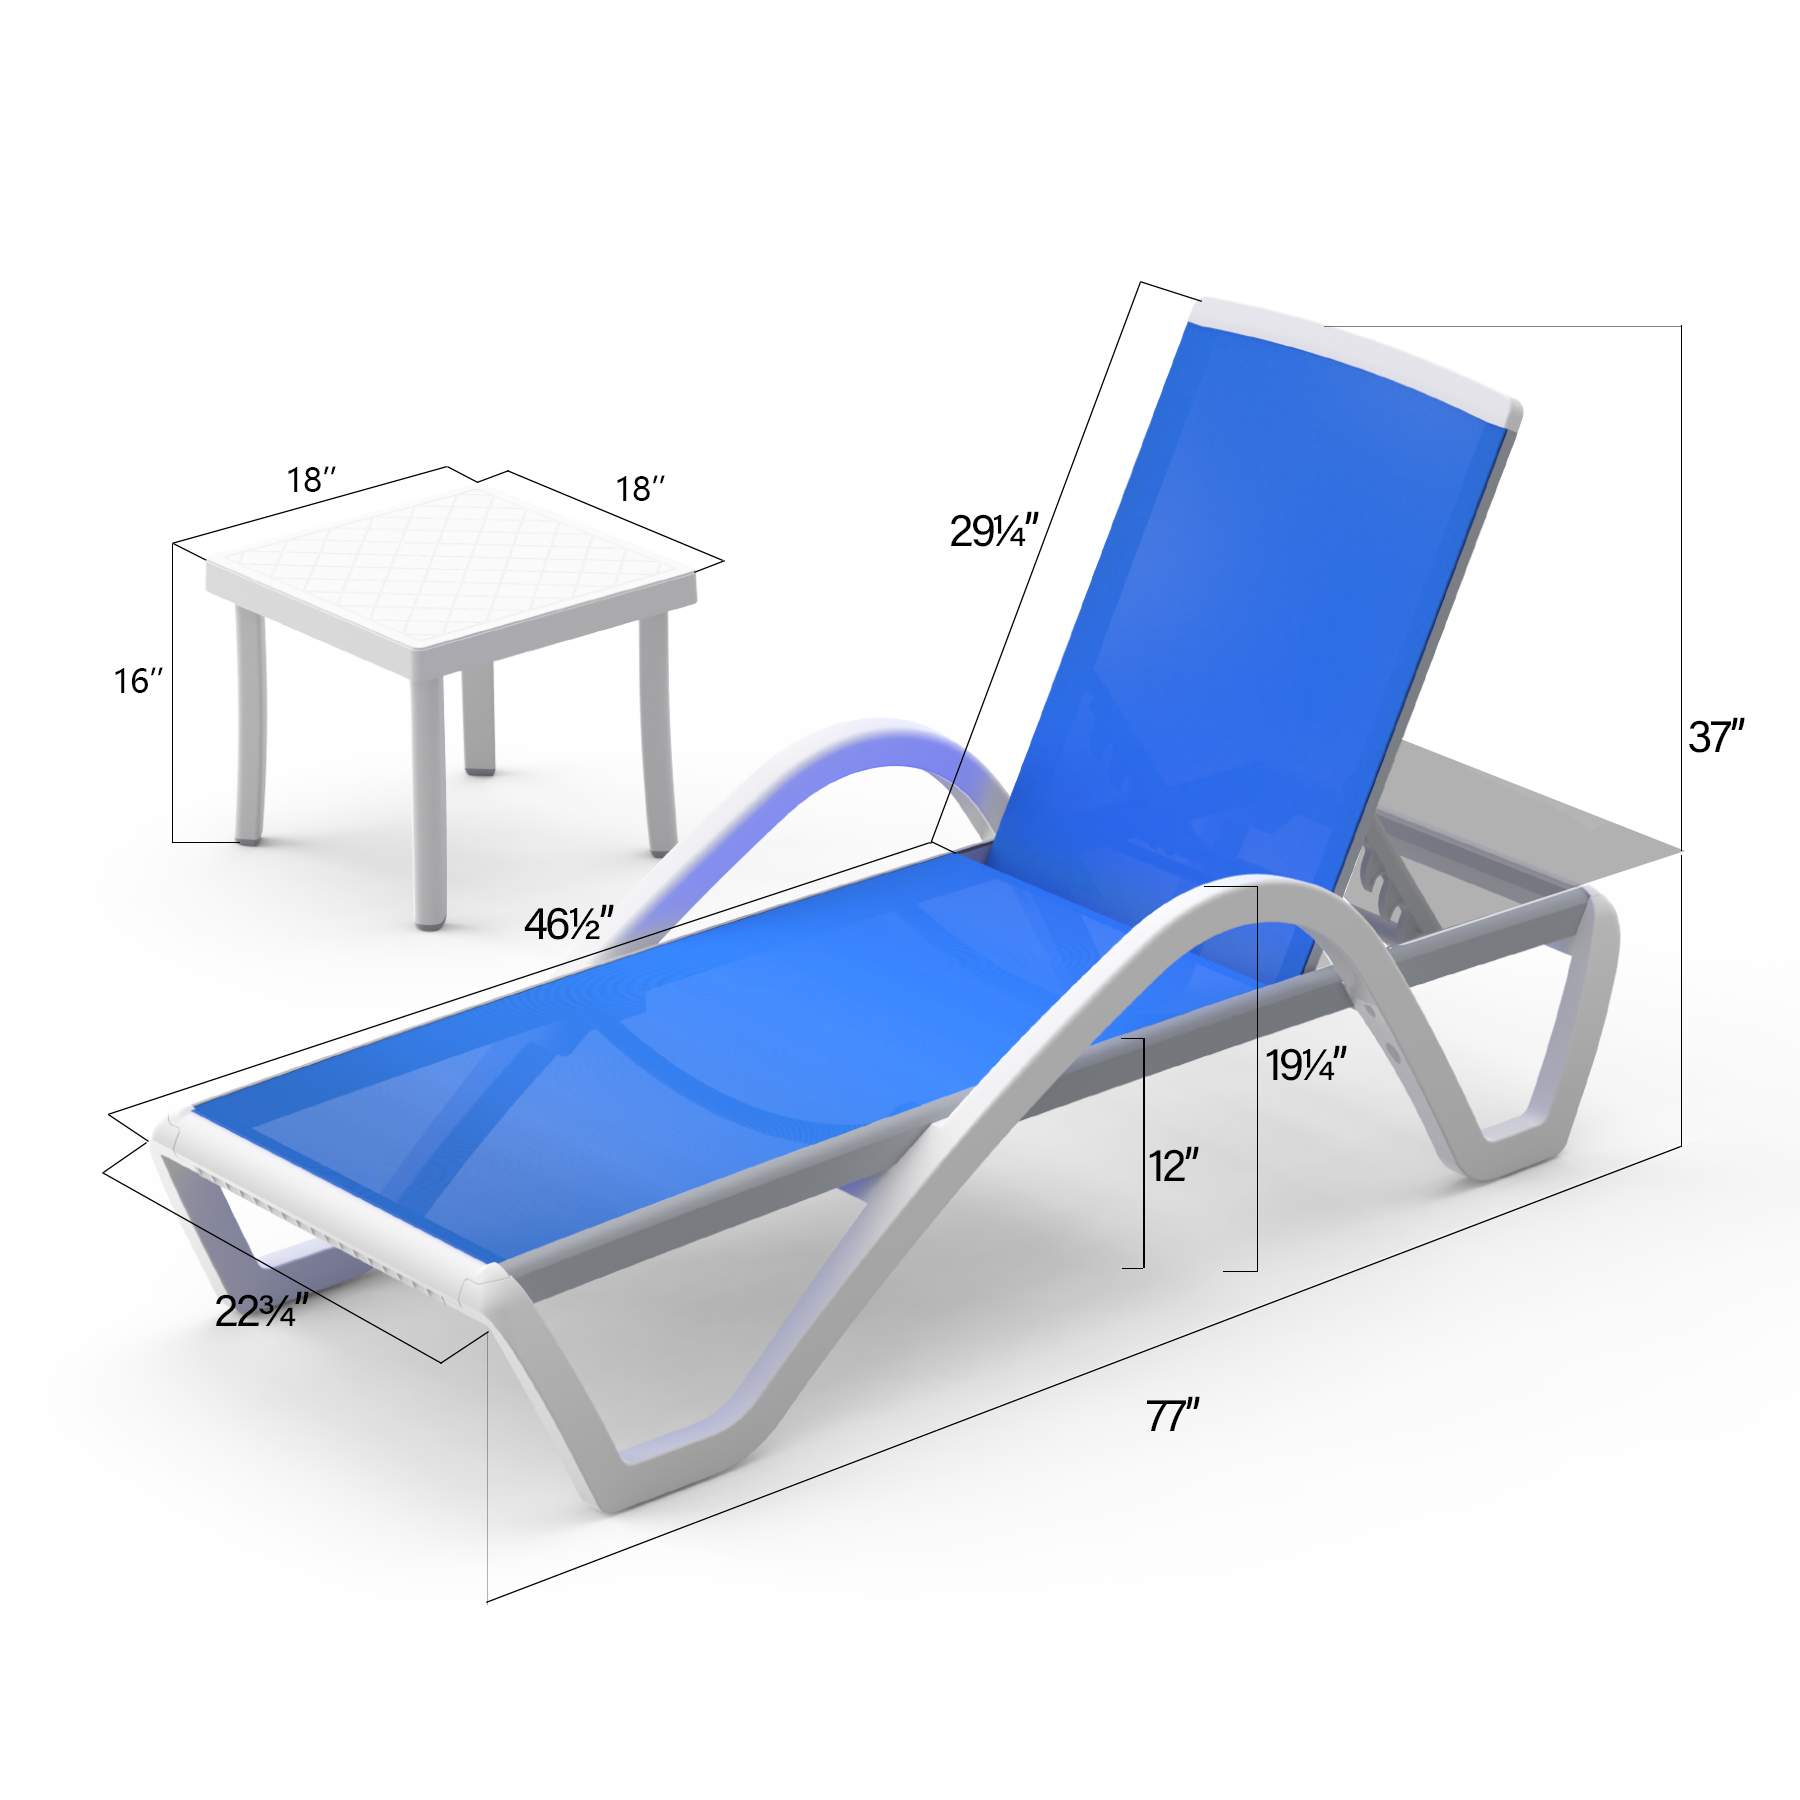 Domi Patio Chaise Lounge Chair Set of 3,Outdoor Aluminum Polypropylene Sunbathing Chair with Adjustable Backrest,Arm,Side Table,for Beach,Yard,Balcony,Poolside(2 Blue Chairs W/Table) - image 2 of 8